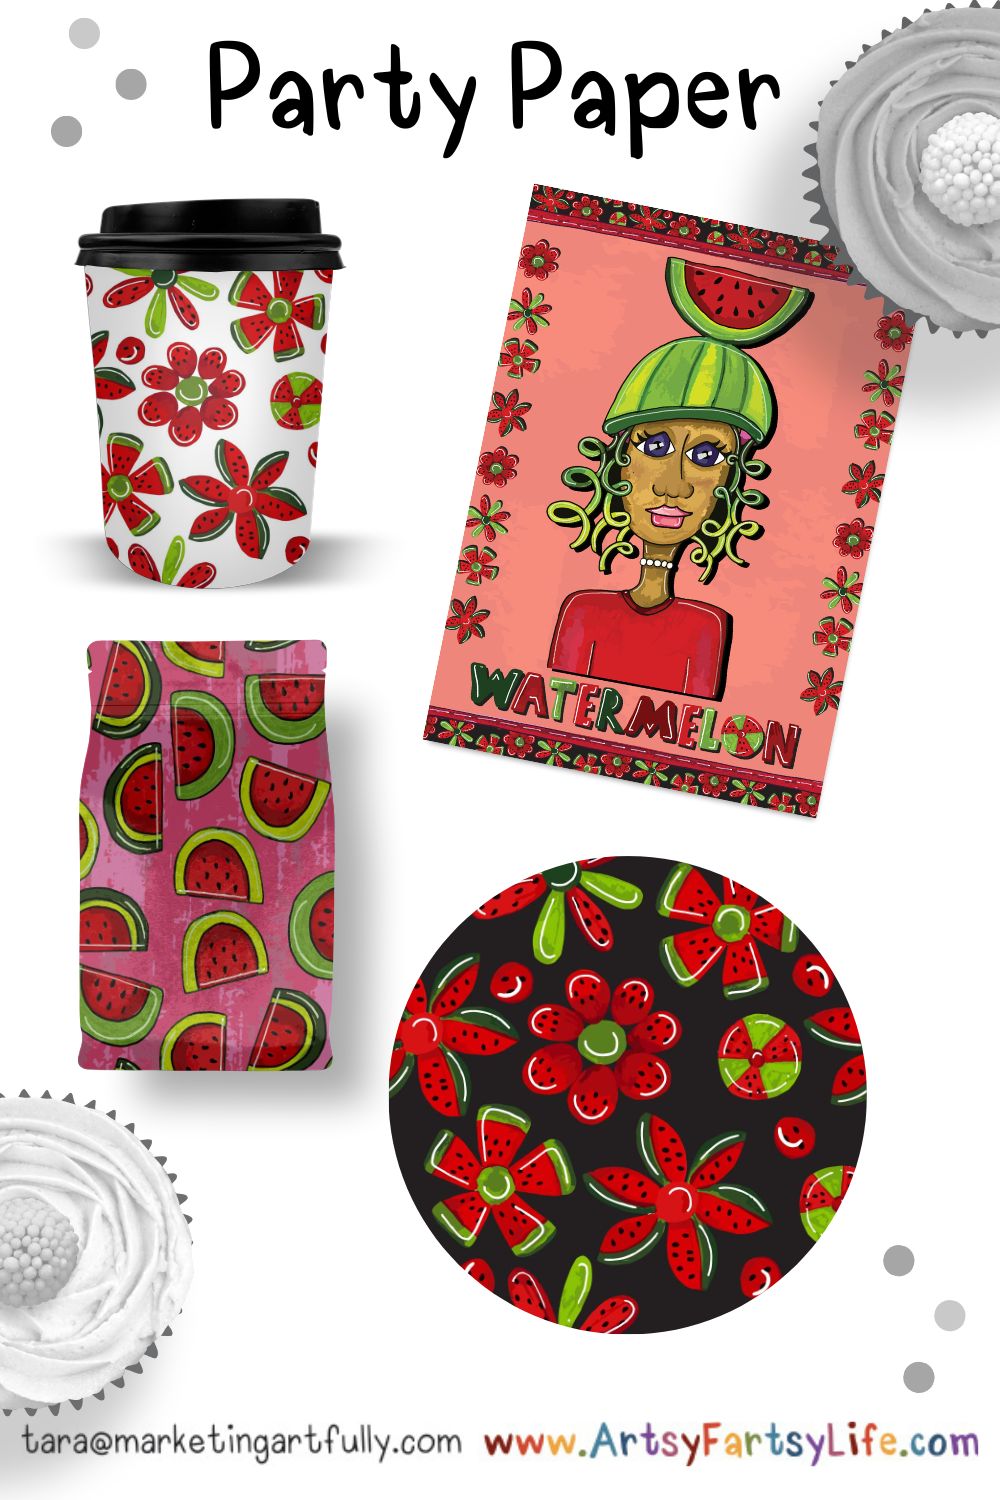 Watermelon Woman Surface Design For Party Paper and Gift Wrap